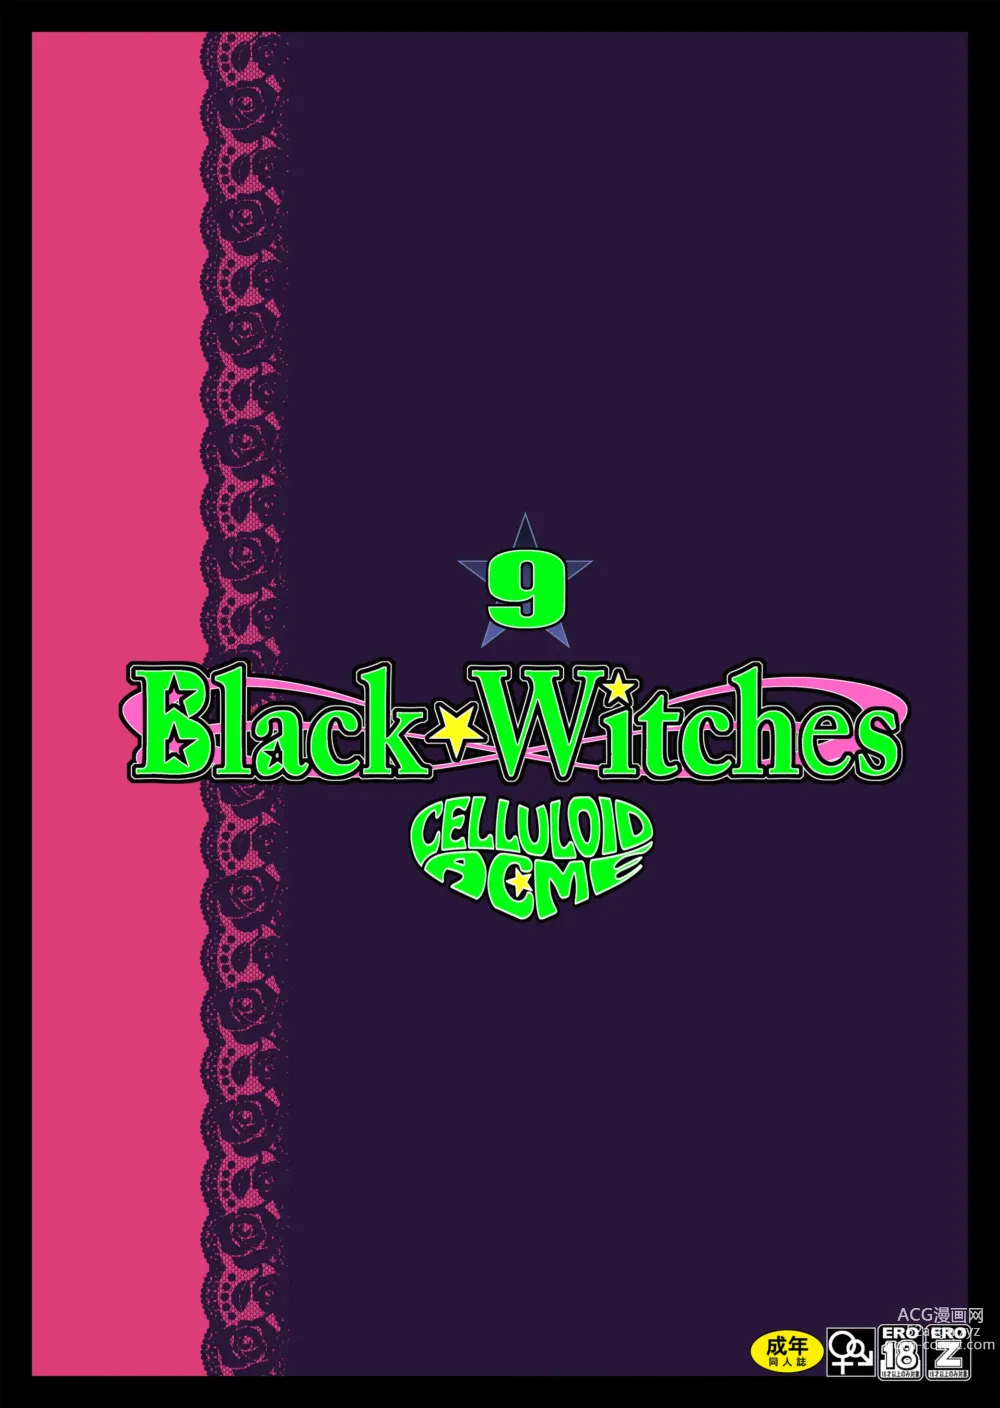 Page 31 of doujinshi Black Witches 9